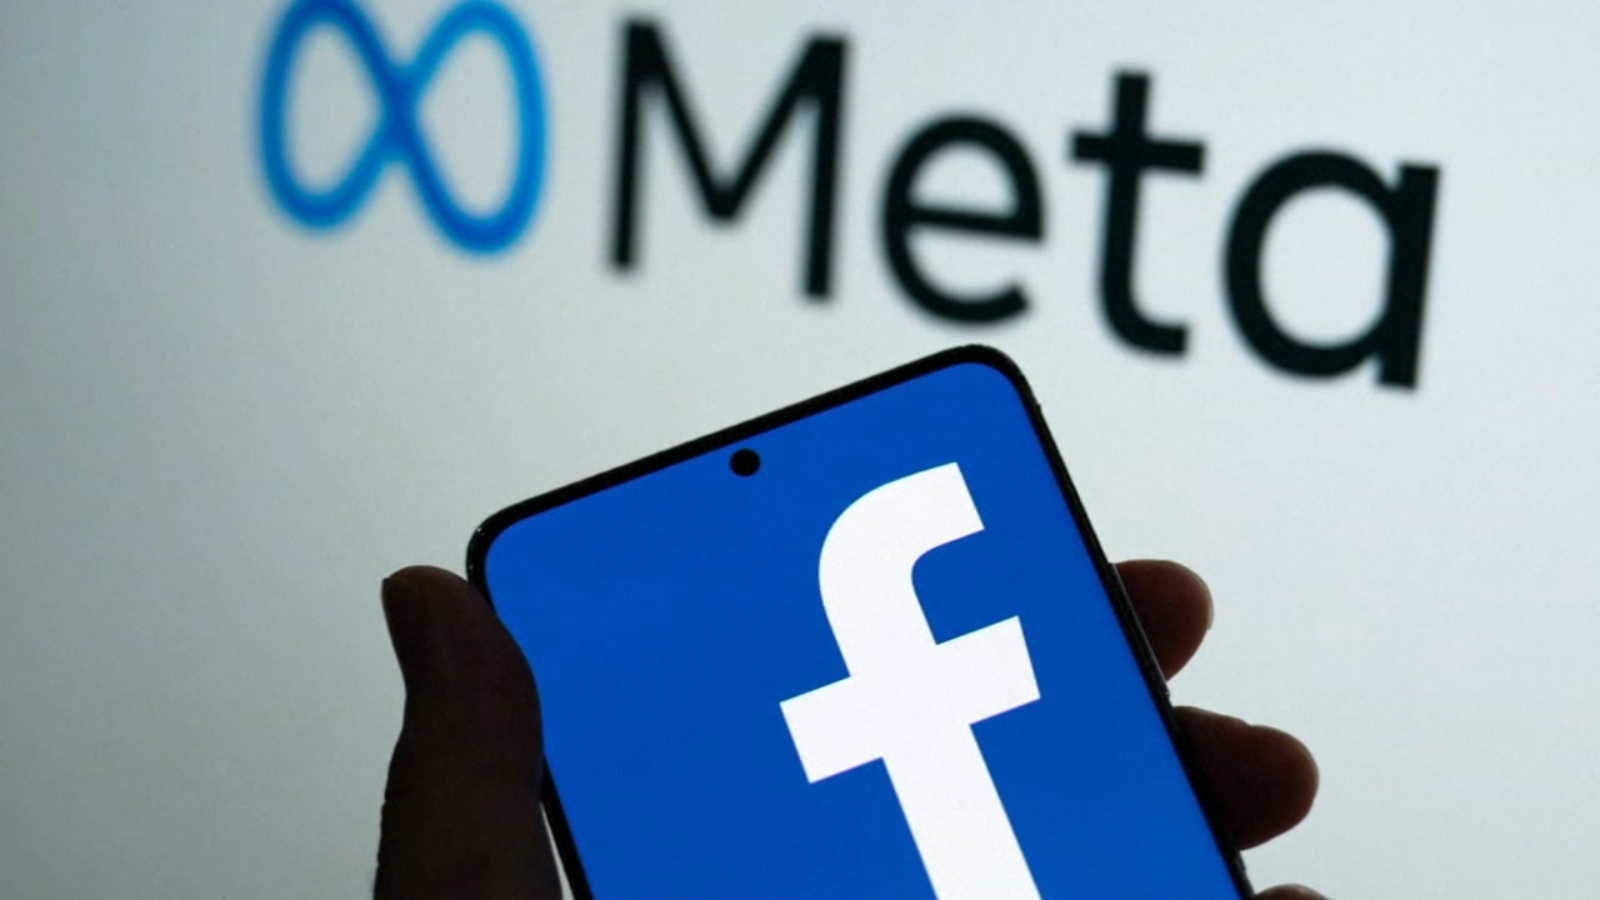 A hand holding a phone showing the Facebook logo with the Meta logo in the background